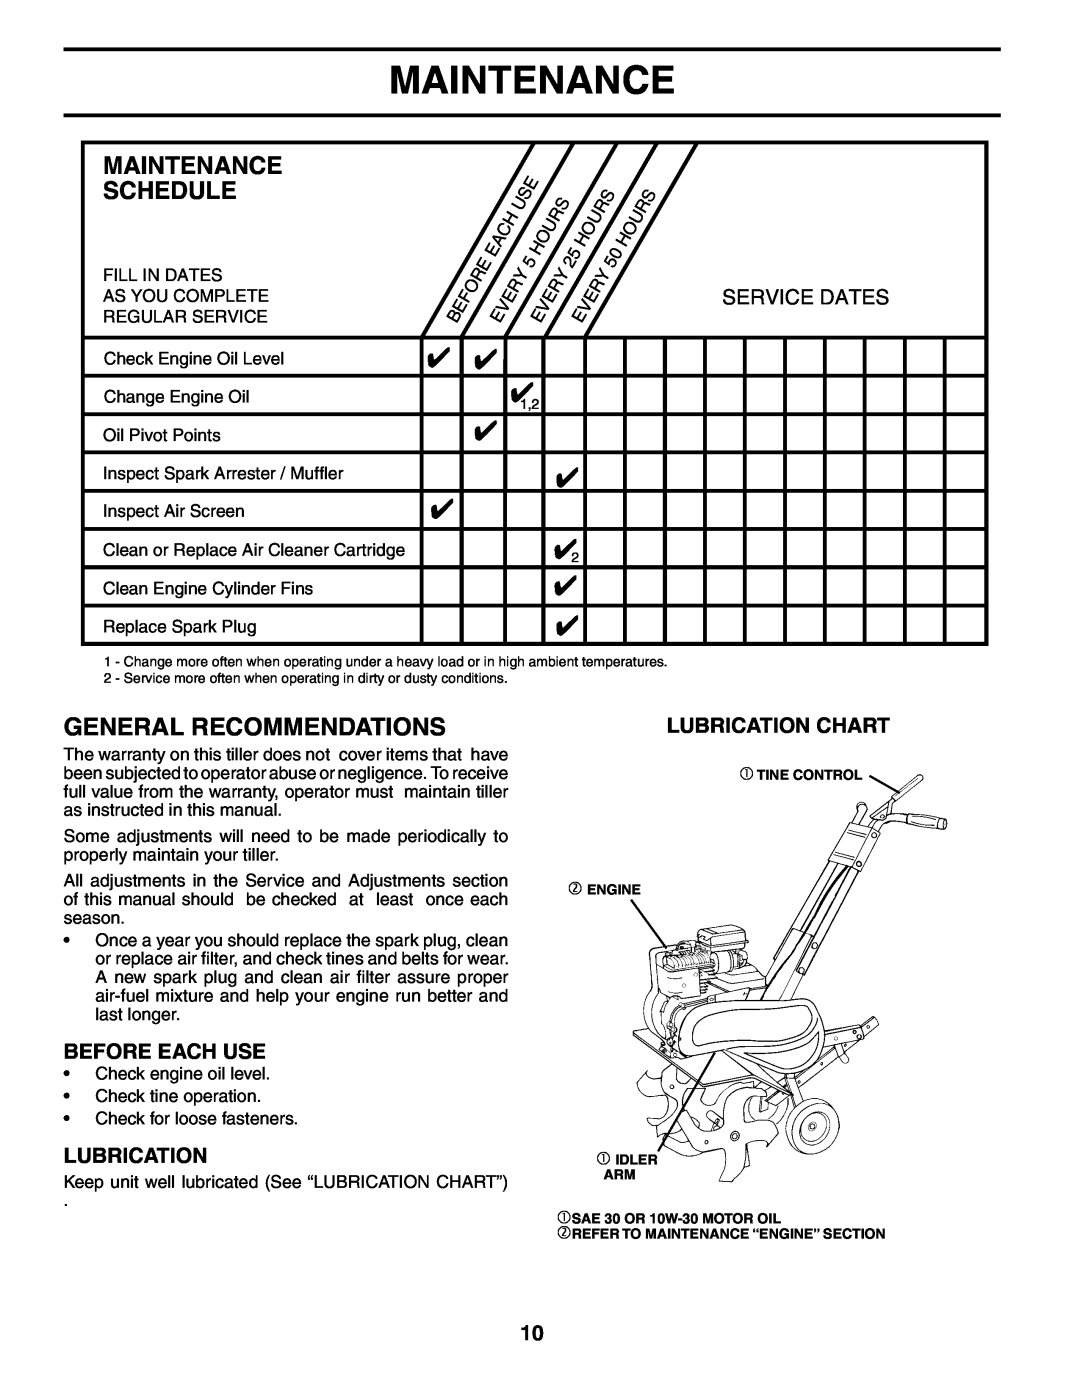 Electrolux FN620K General Recommendations, Before Each Use, Lubrication Chart, Maintenance Schedule, Service Dates 